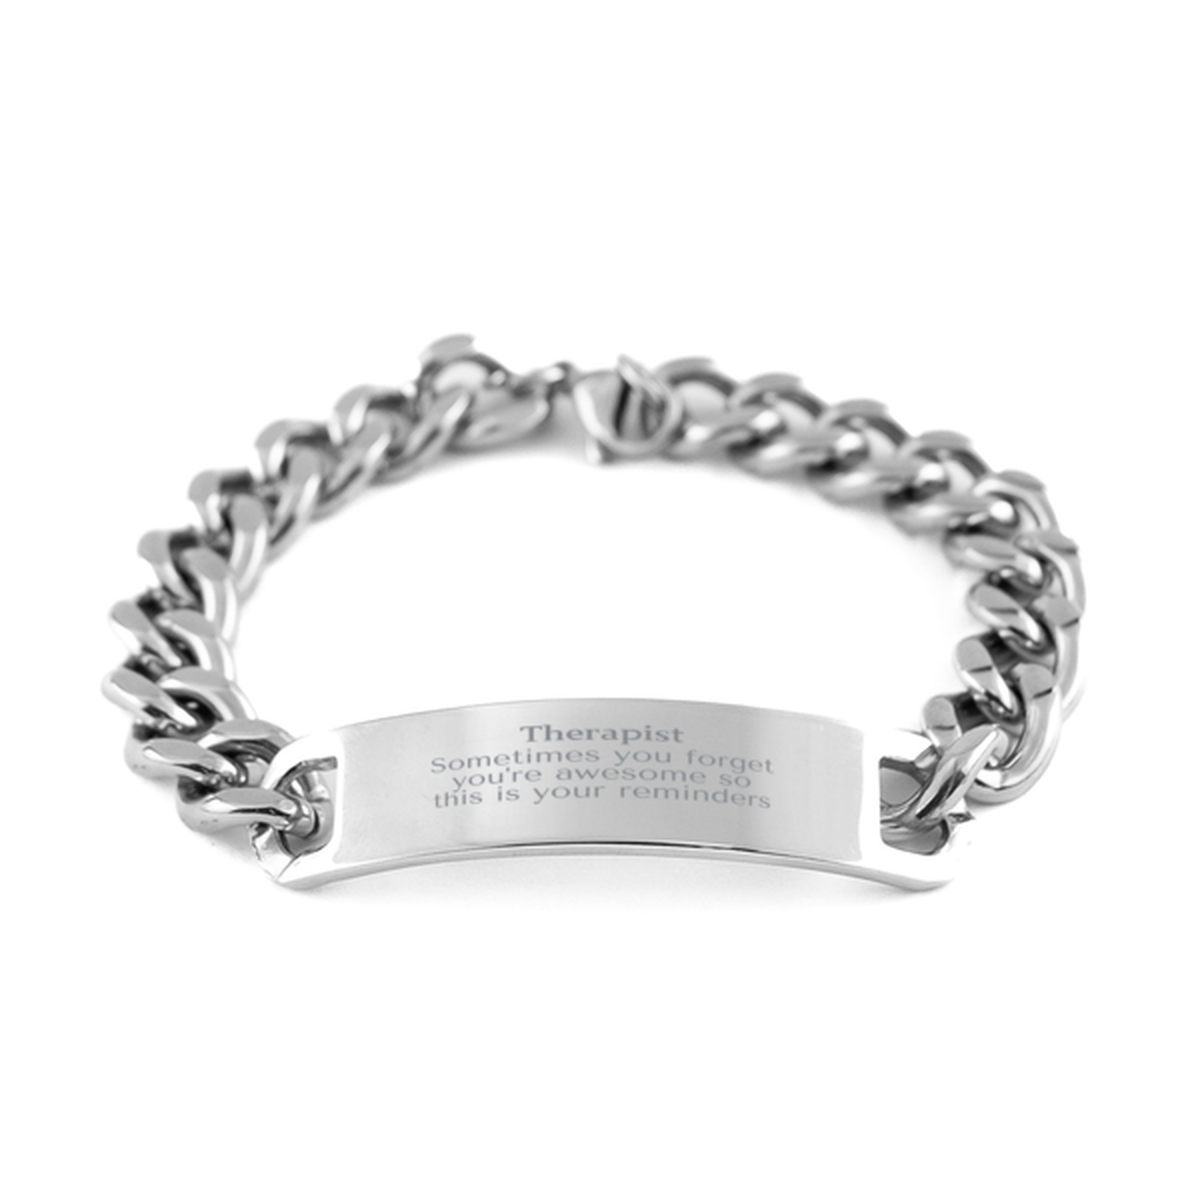 Sentimental Therapist Cuban Chain Stainless Steel Bracelet, Therapist Sometimes you forget you're awesome so this is your reminders, Graduation Christmas Birthday Gifts for Therapist, Men, Women, Coworkers